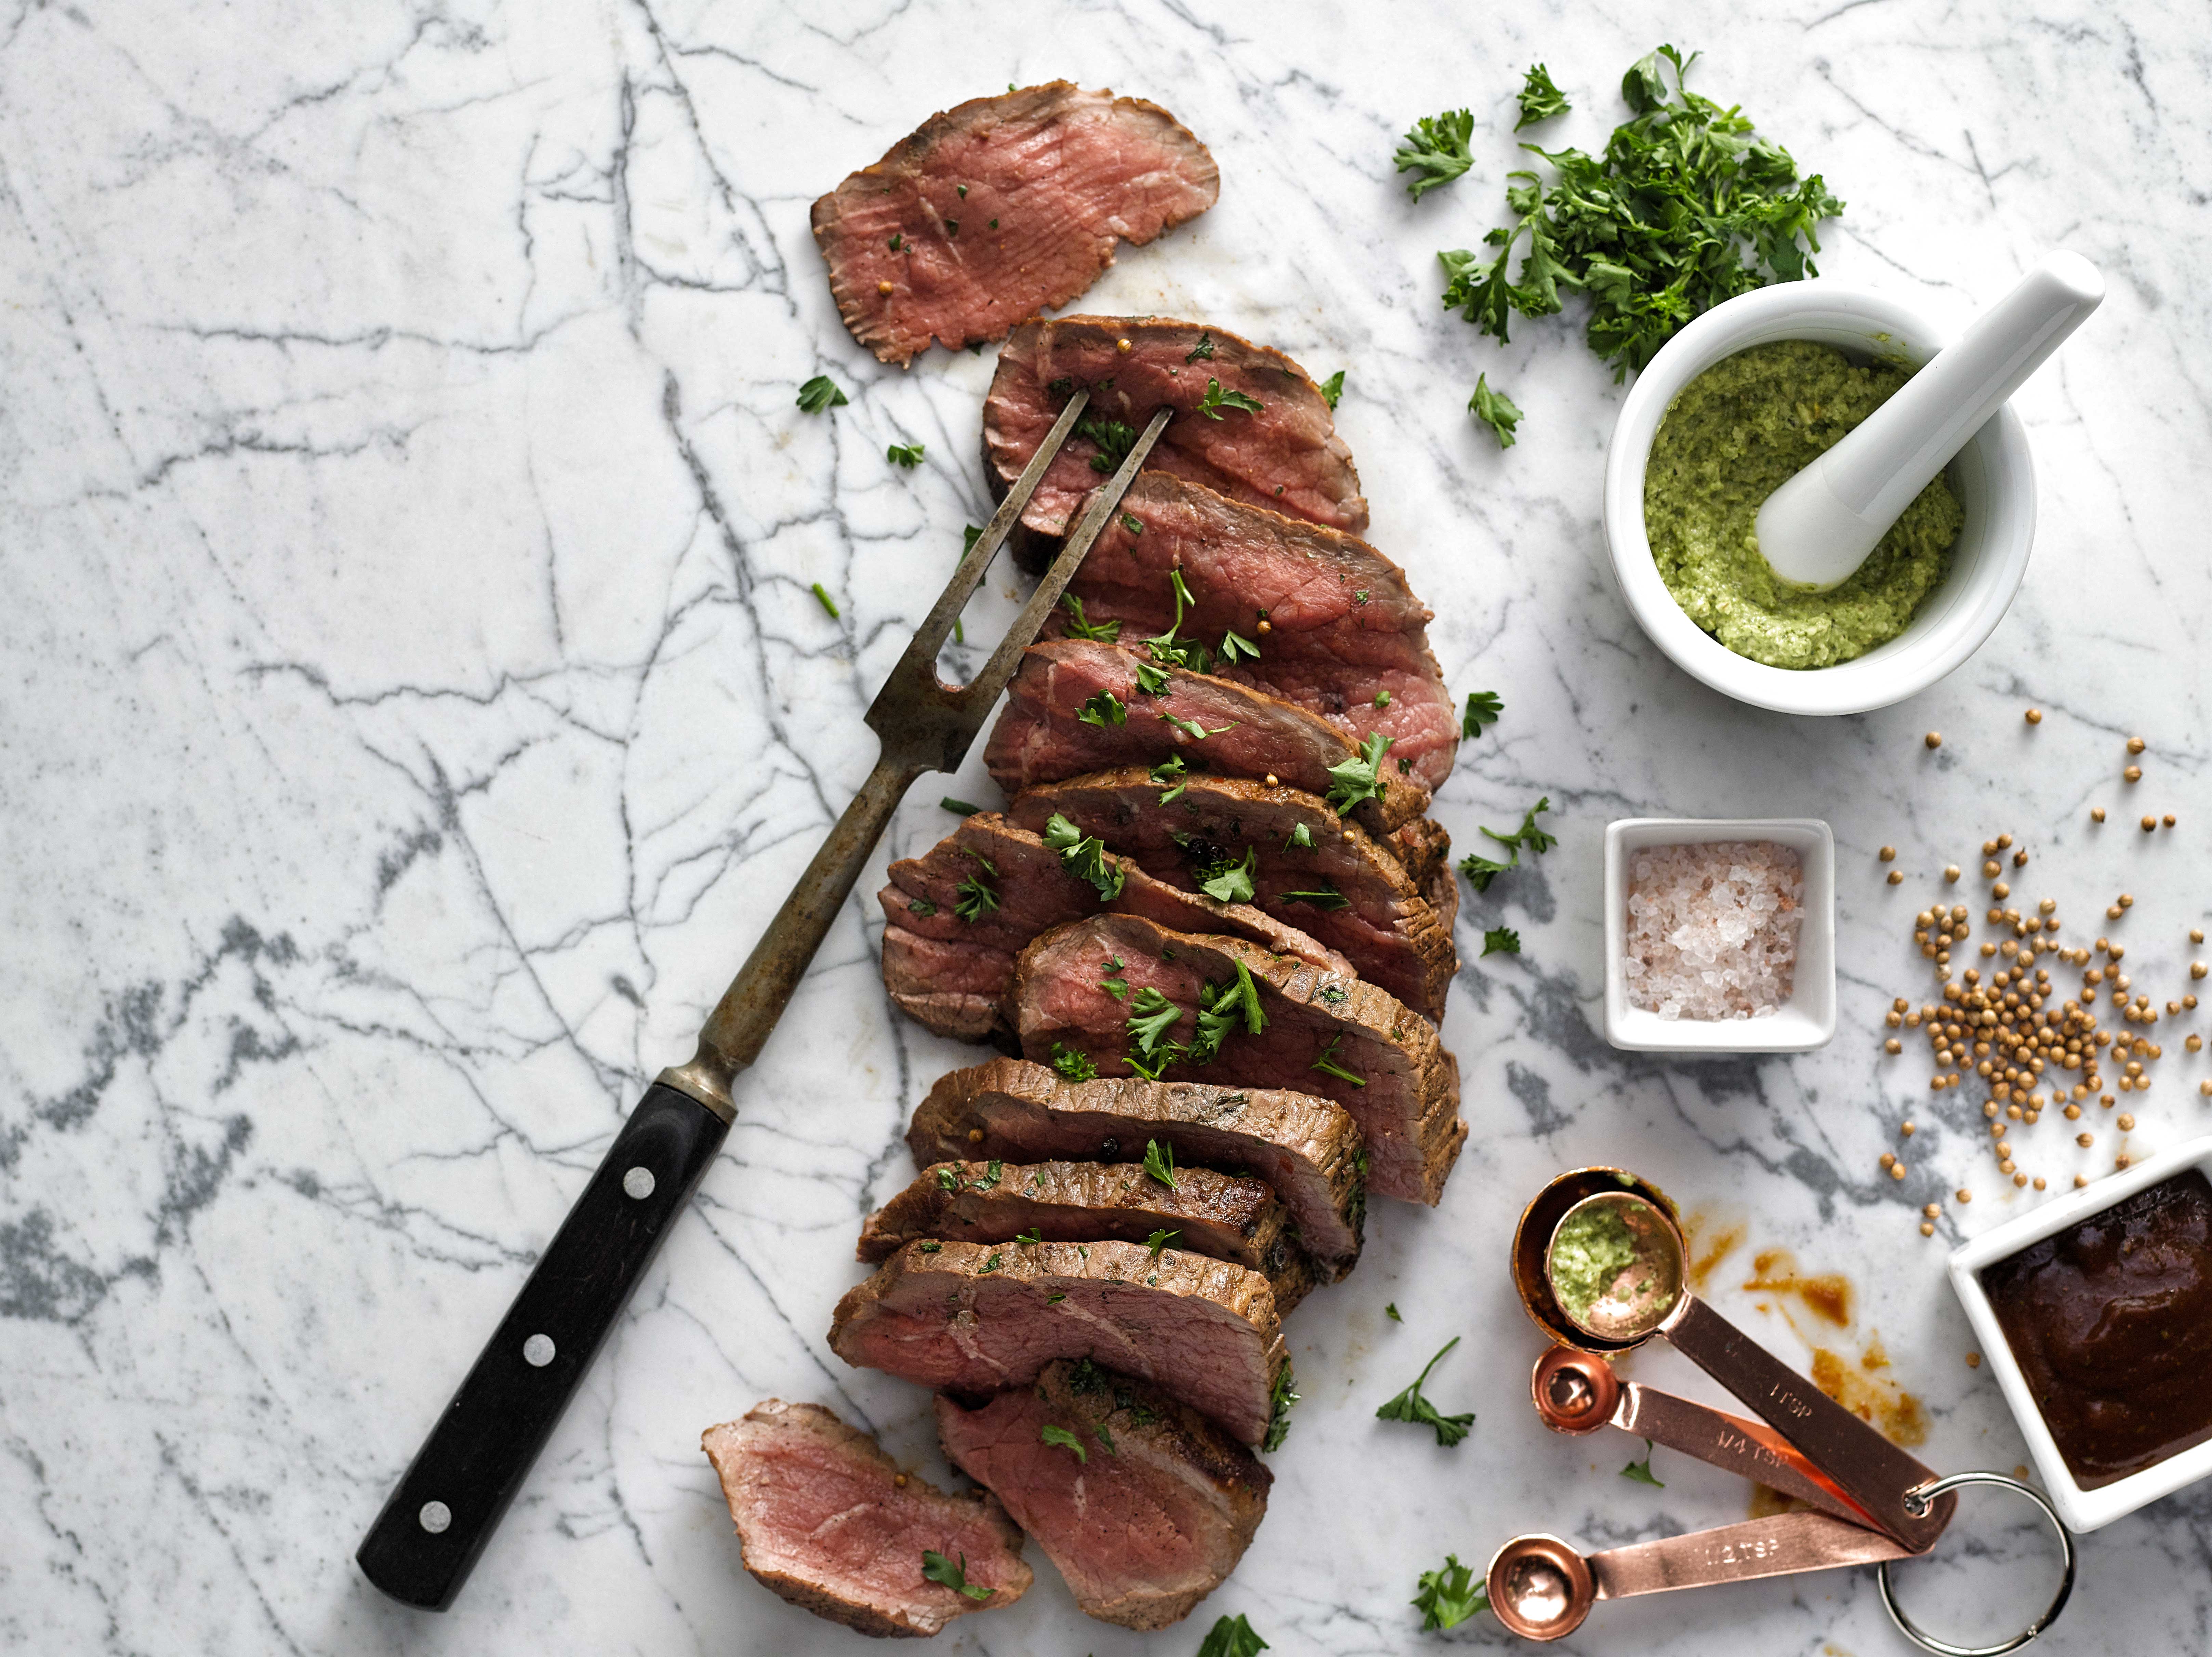 Grilled steak styled photograph from above with ingredients